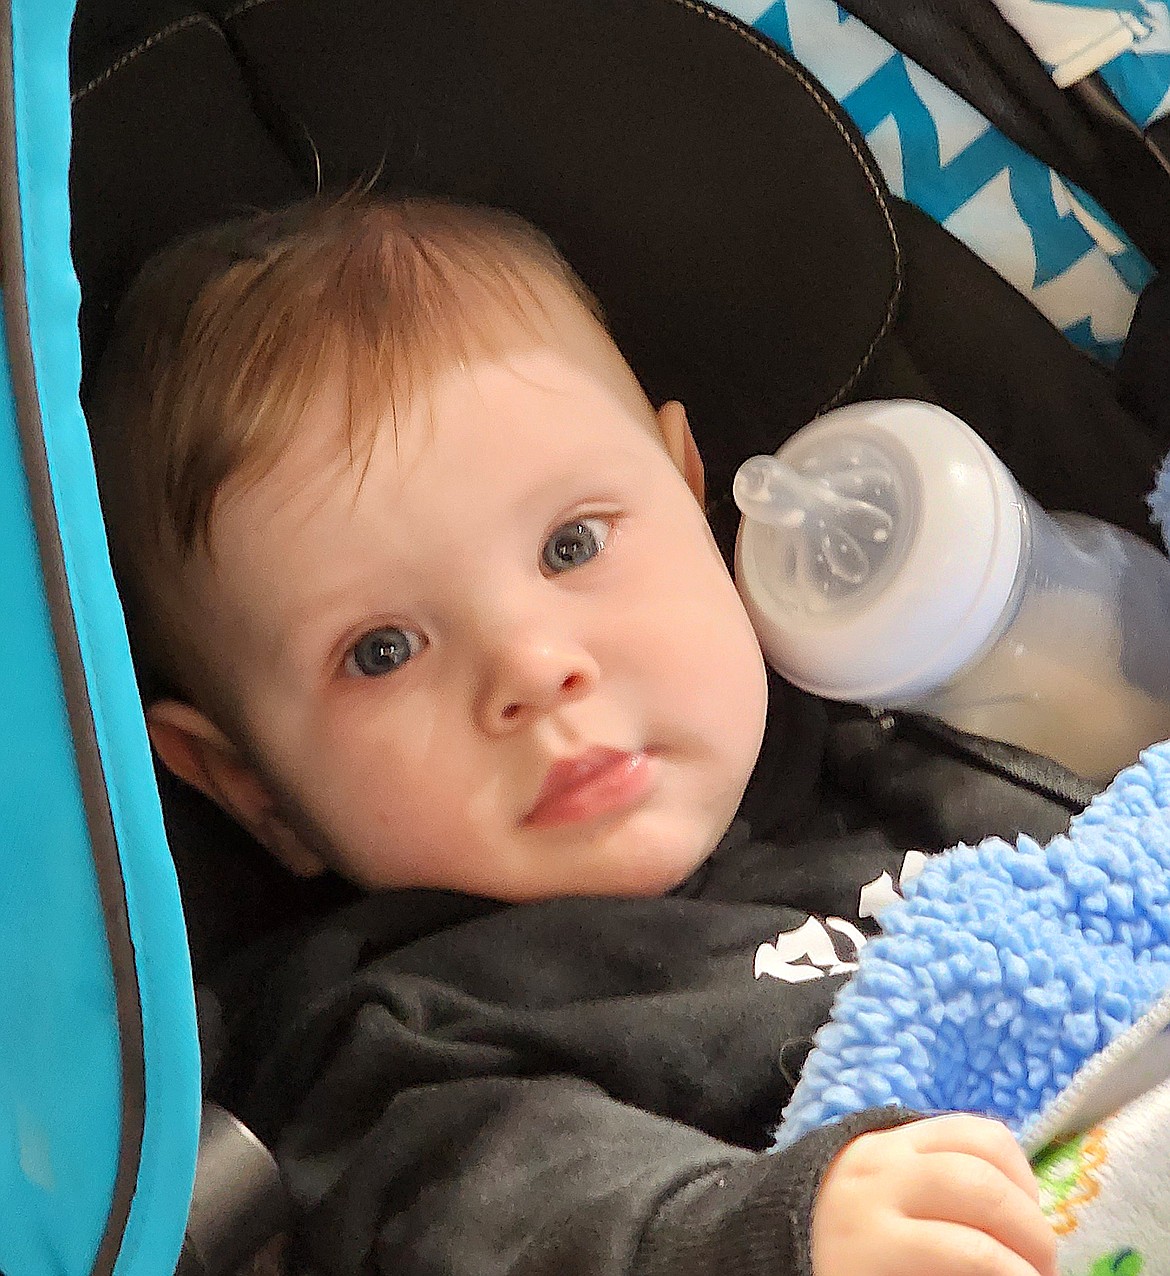 This young man was wide awake and enjoying the Baby Fair while his twin sister napped. (Berl Tiskus/Leader)